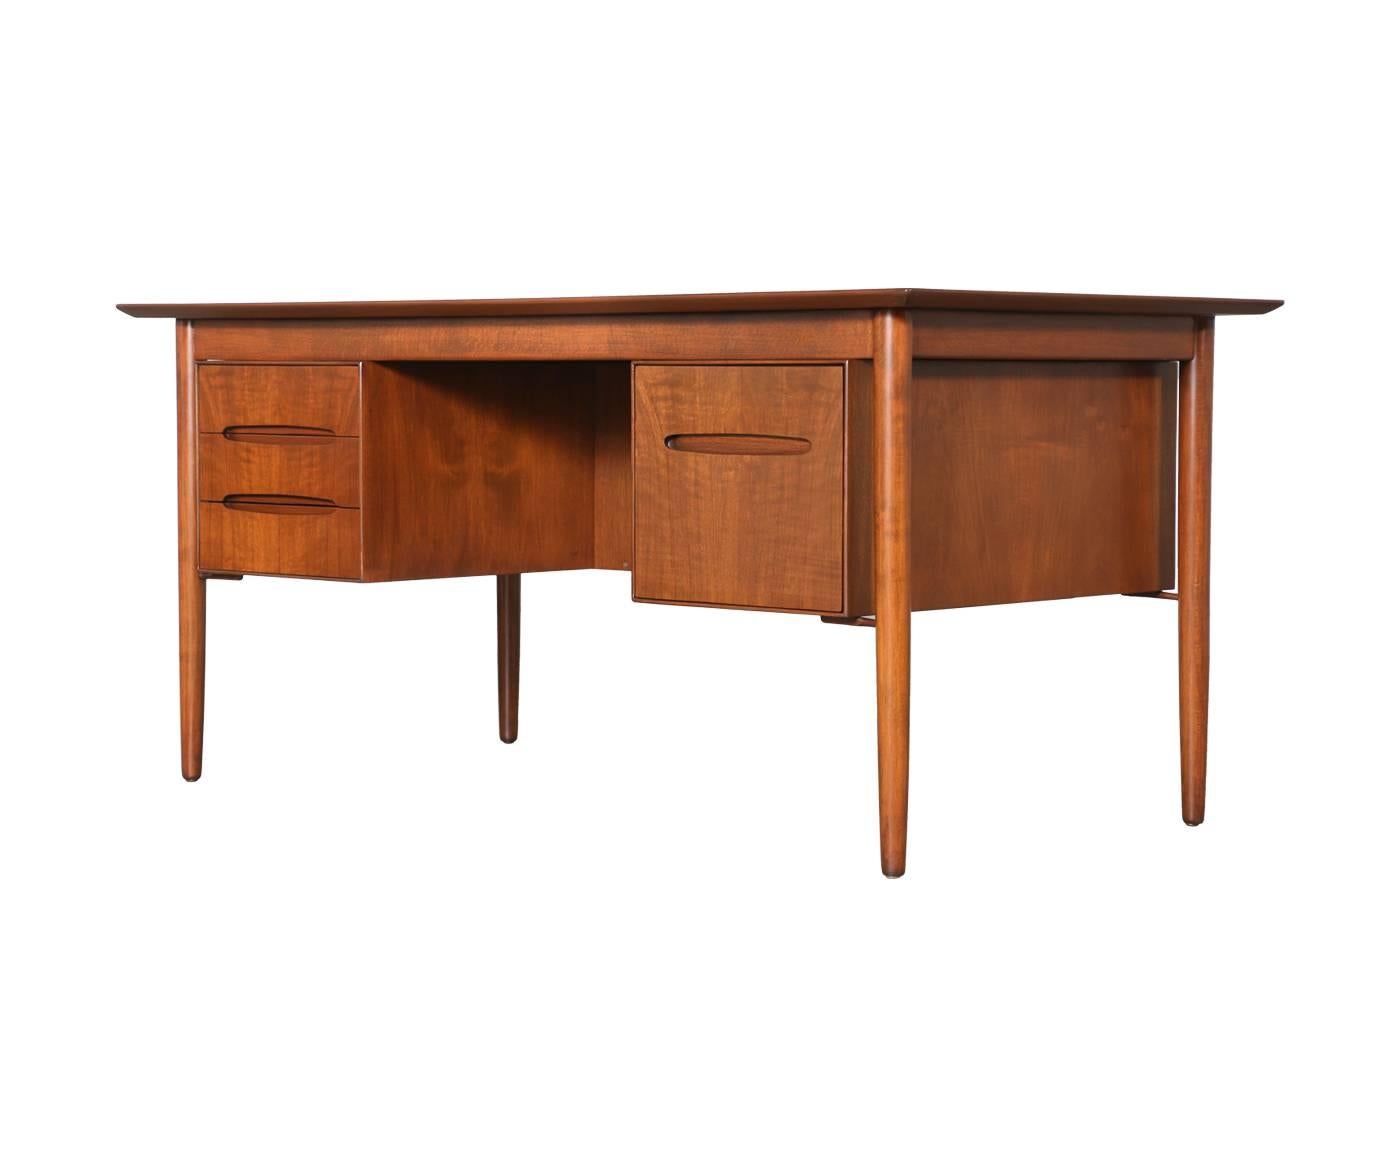 Designer: Unknown.
Manufacturer: Unknown.
Period/Style: Danish modern.
Country: Denmark.
Date: 1950s.

Dimensions: 27″ H x 59″ W x 31.5″ D.
Materials: Walnut
Condition: Excellent, newly refinished.
Number of items: One.
ID number: 4443.